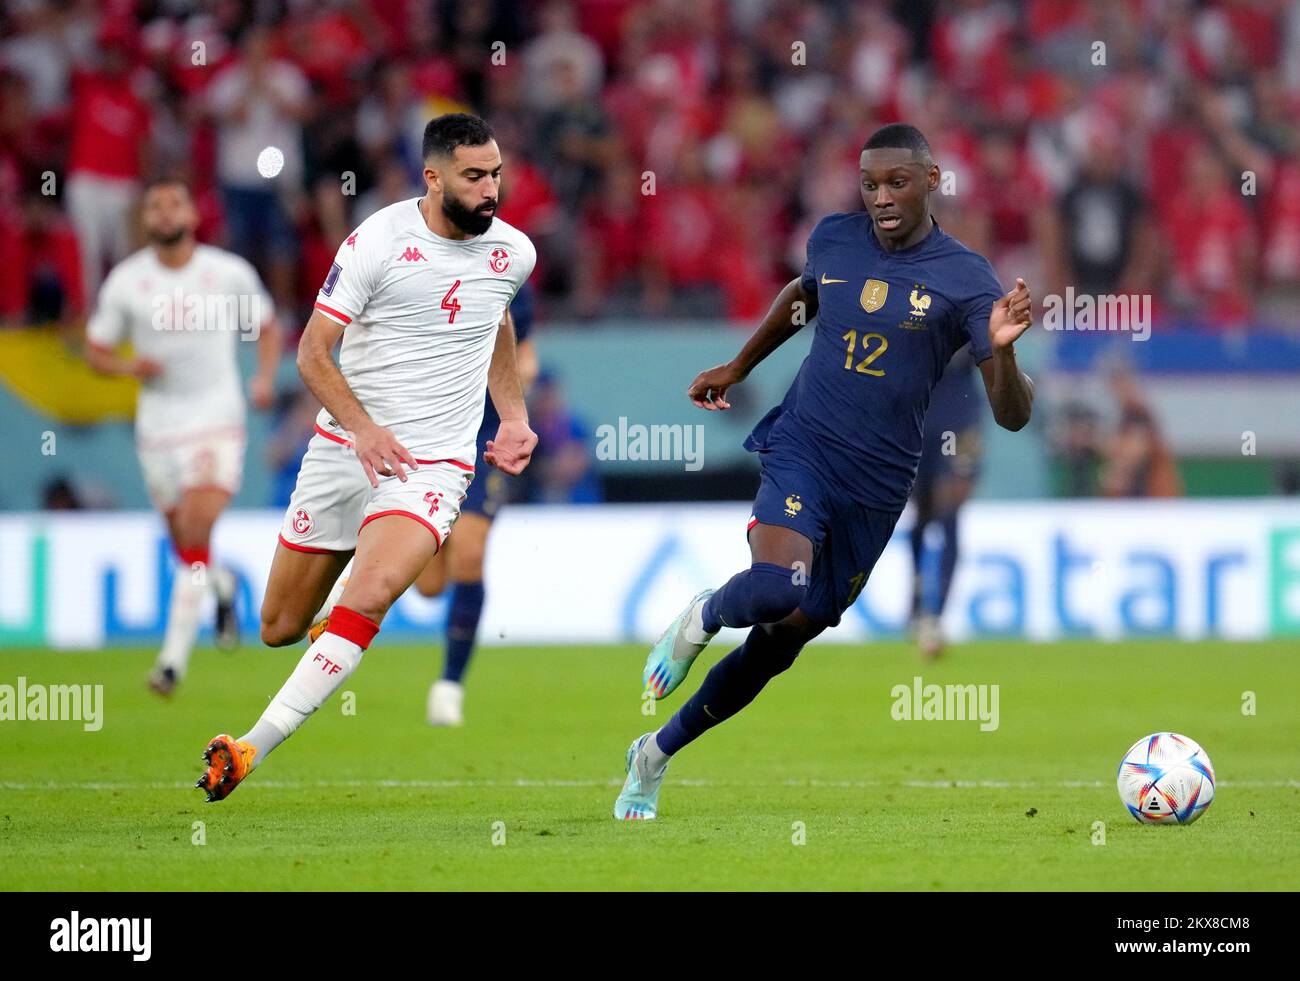 Tunisia's Yassine Meriah (left) and France's Randal Kolo Muani battle for the ball during the FIFA World Cup Group D match at the Education City Stadium in Al Rayyan, Qatar. Picture date: Wednesday November 30, 2022. Stock Photo